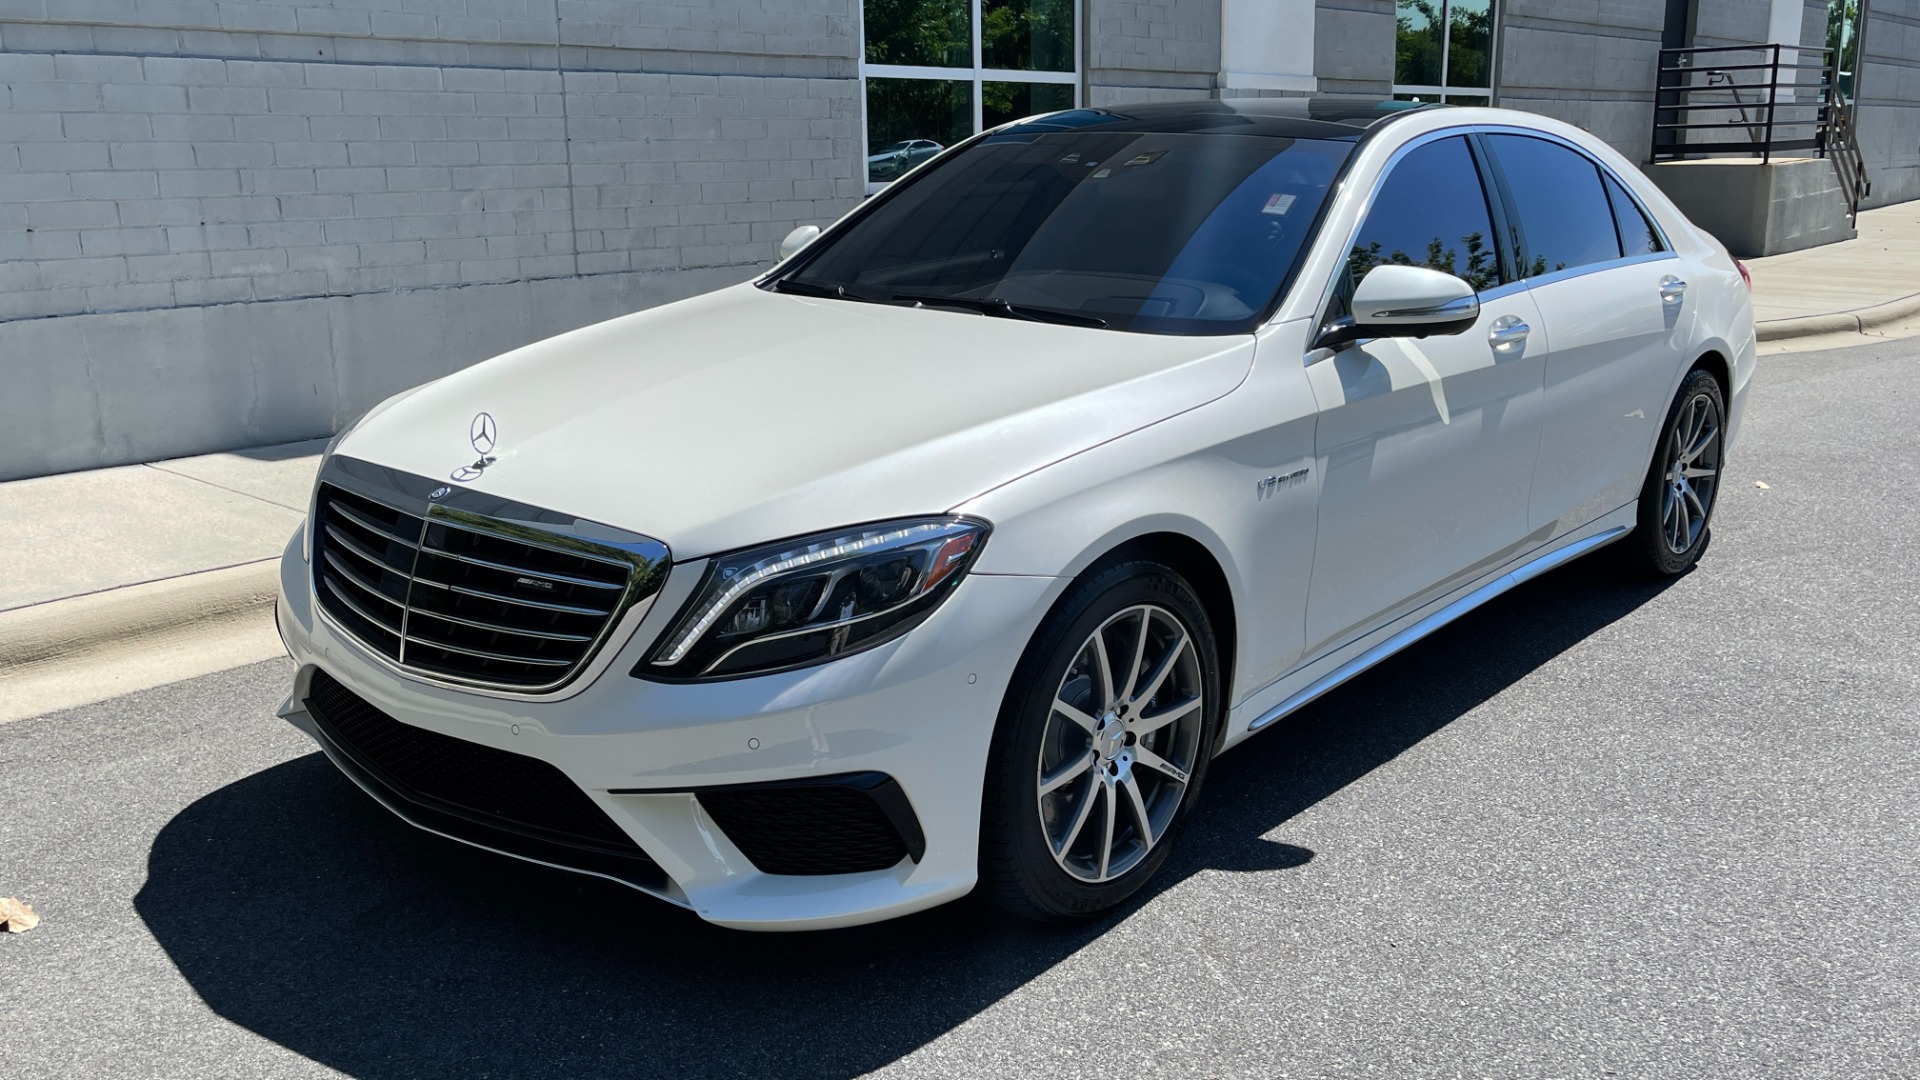 Used 2016 Mercedes-Benz S-Class AMG S63 / EXCLUSIVE TRIM / BURMESTER 3D HIGH END SOUND / DRIVER ASSISTANCE  for sale $68,995 at Formula Imports in Charlotte NC 28227 5